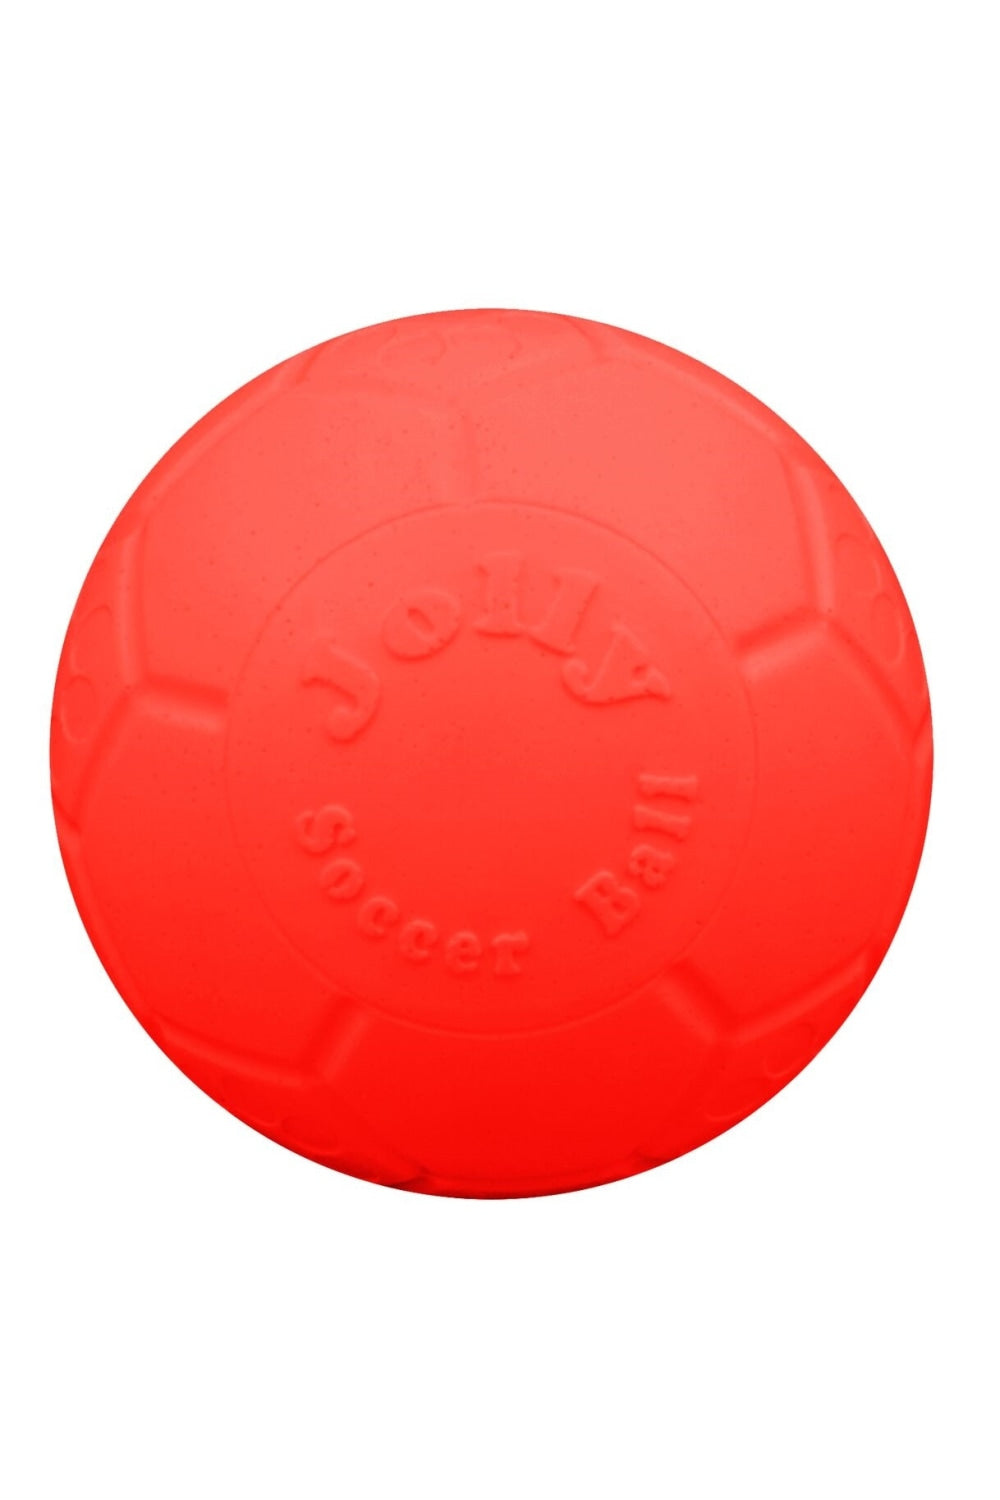 Jolly Pets Jolly Soccer Ball (Orange) (8 inches)